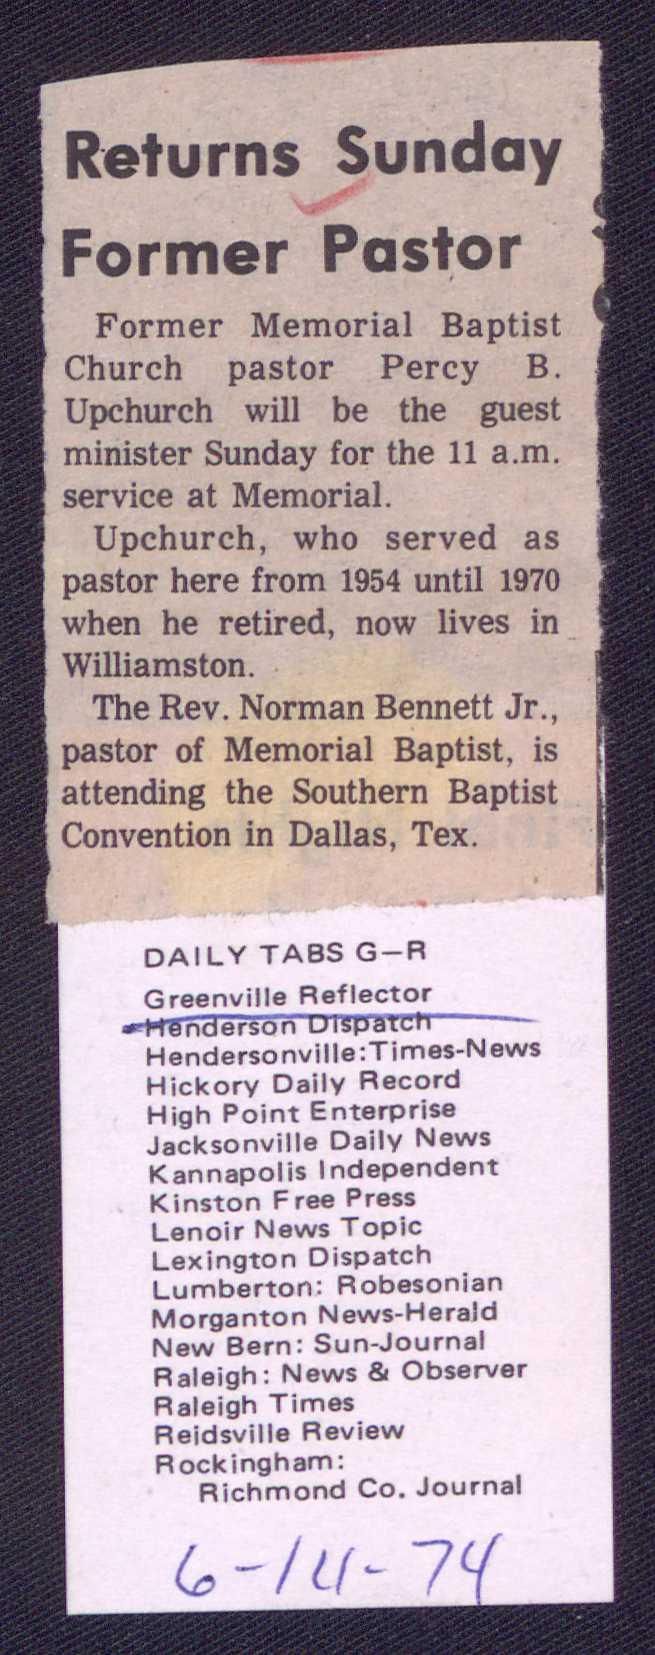 Returns Former Pas~or Former Memorial Baptist Church pastor Percy B. Upchurch will be the guest minister Sunday for the 11 a.m. service at Memorial.